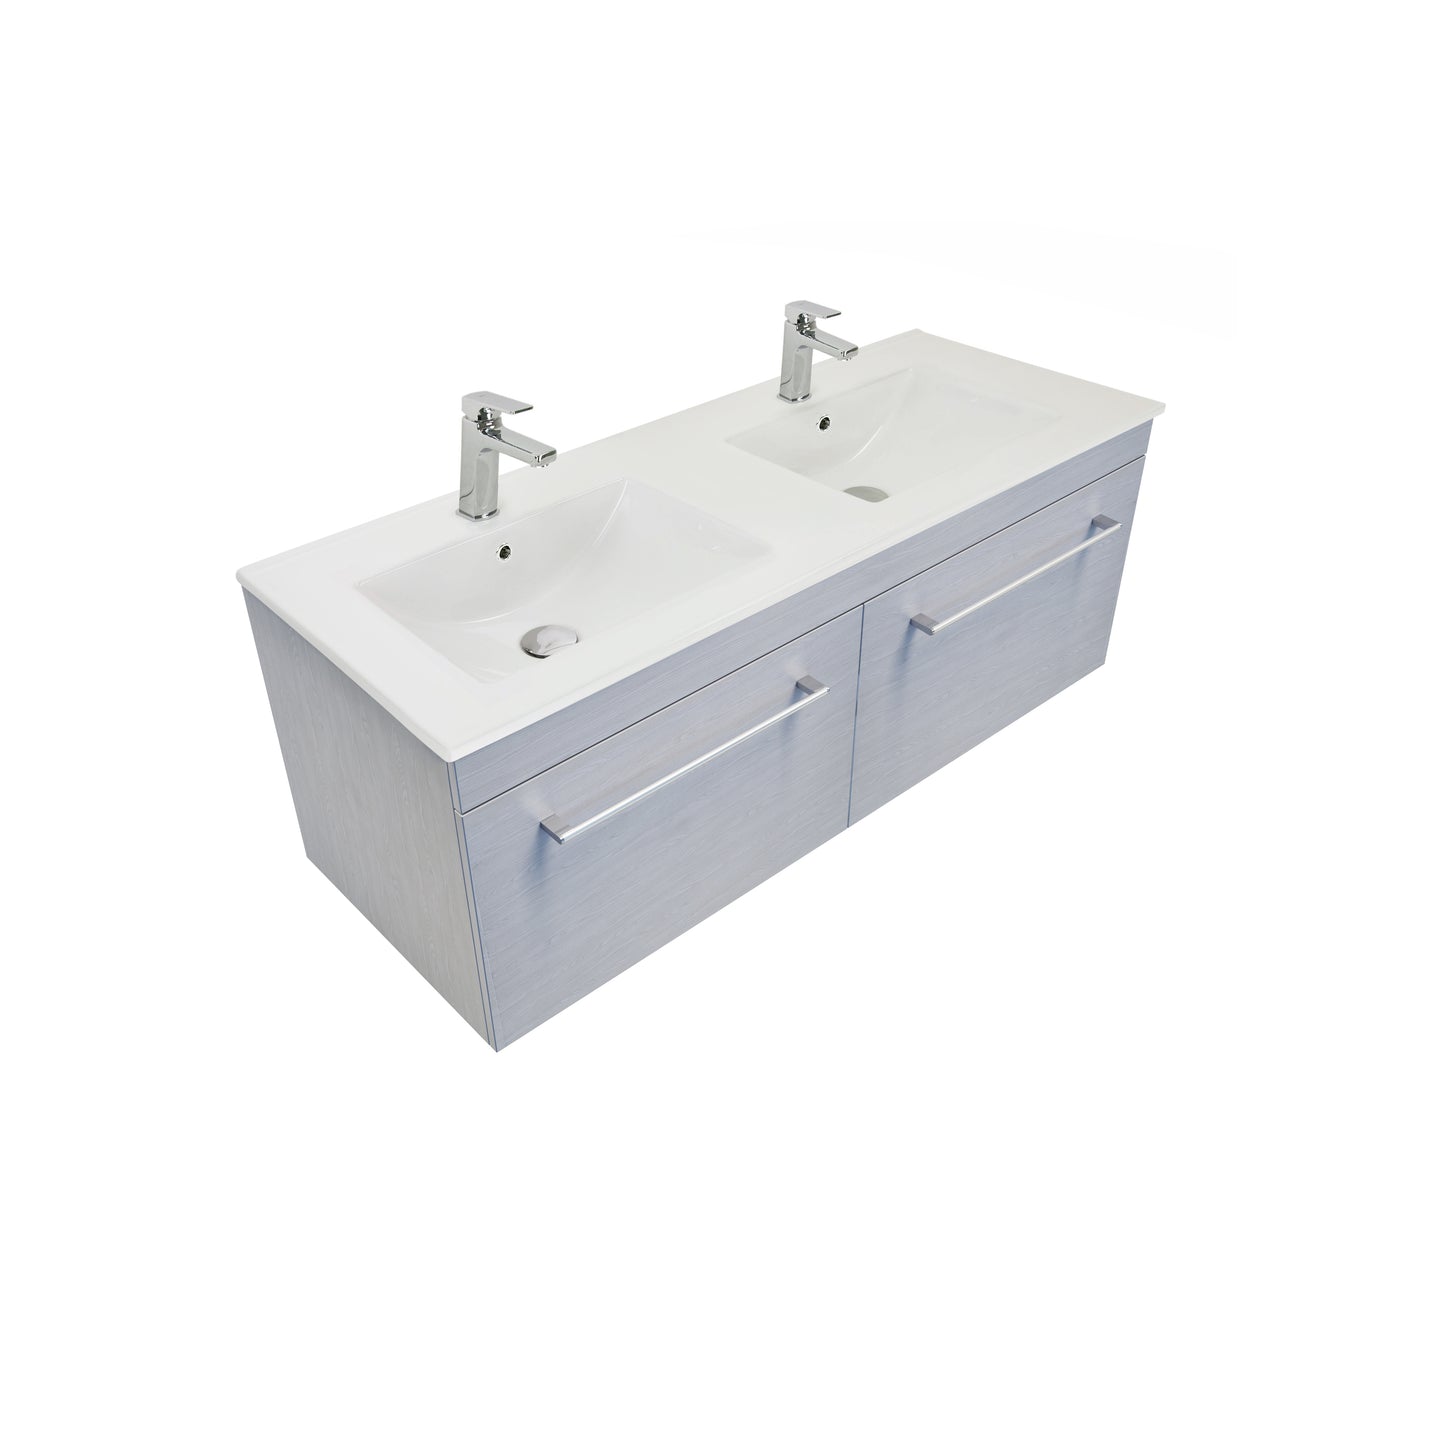 Citi 1200 Wall Hung Vanity (2 Drawer) in Winter Birch with Ari Double Basin - No Taphole